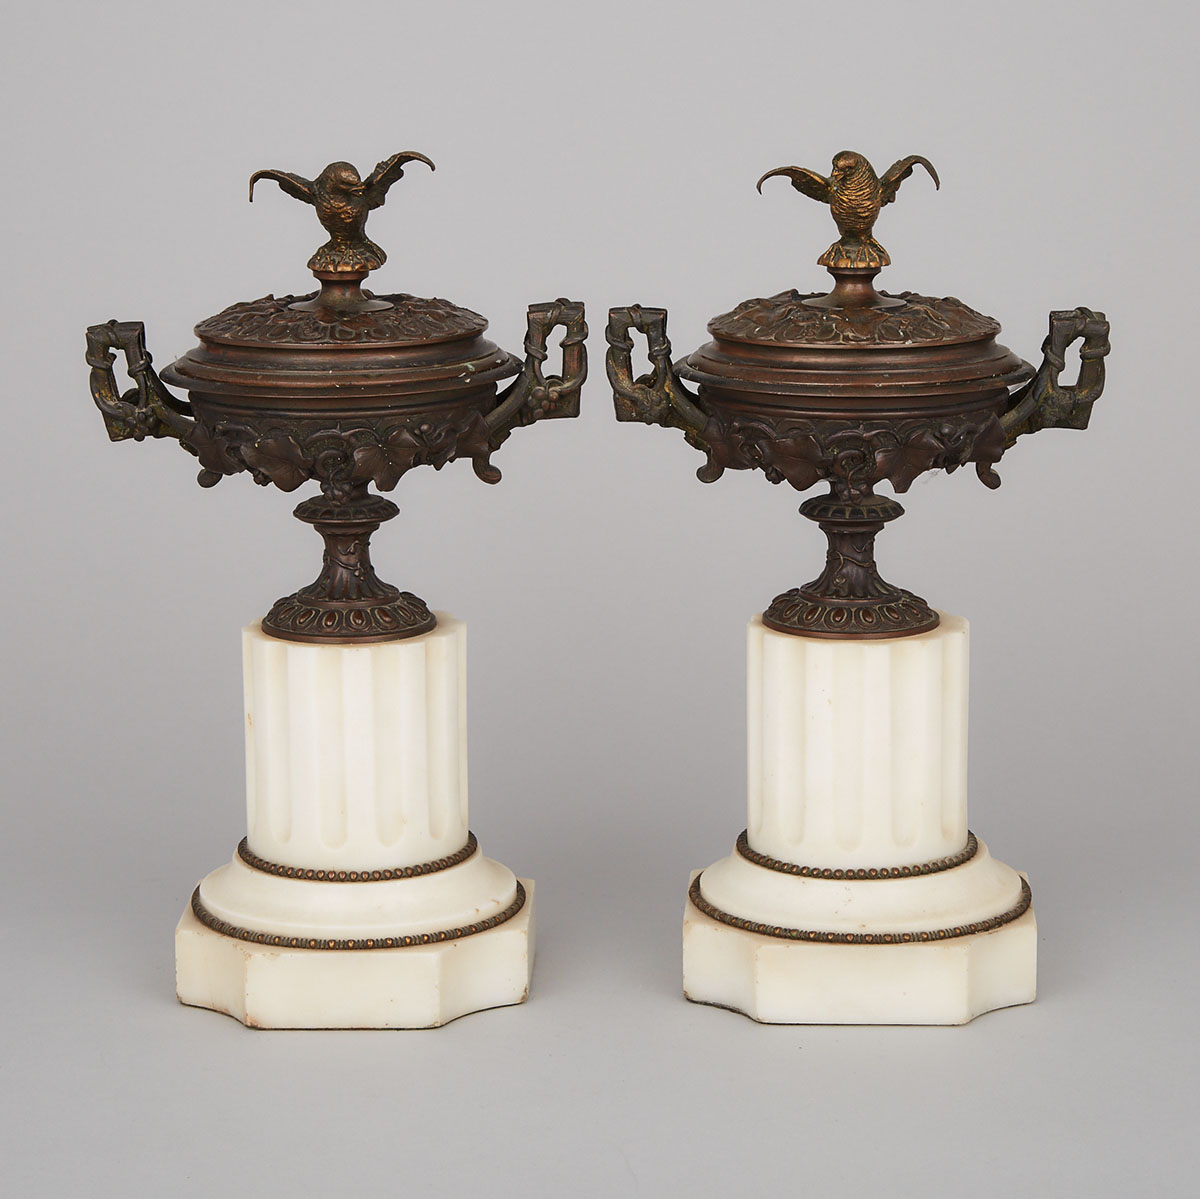 Pair of French Patinated Bronze Mantle Urns, c.1880